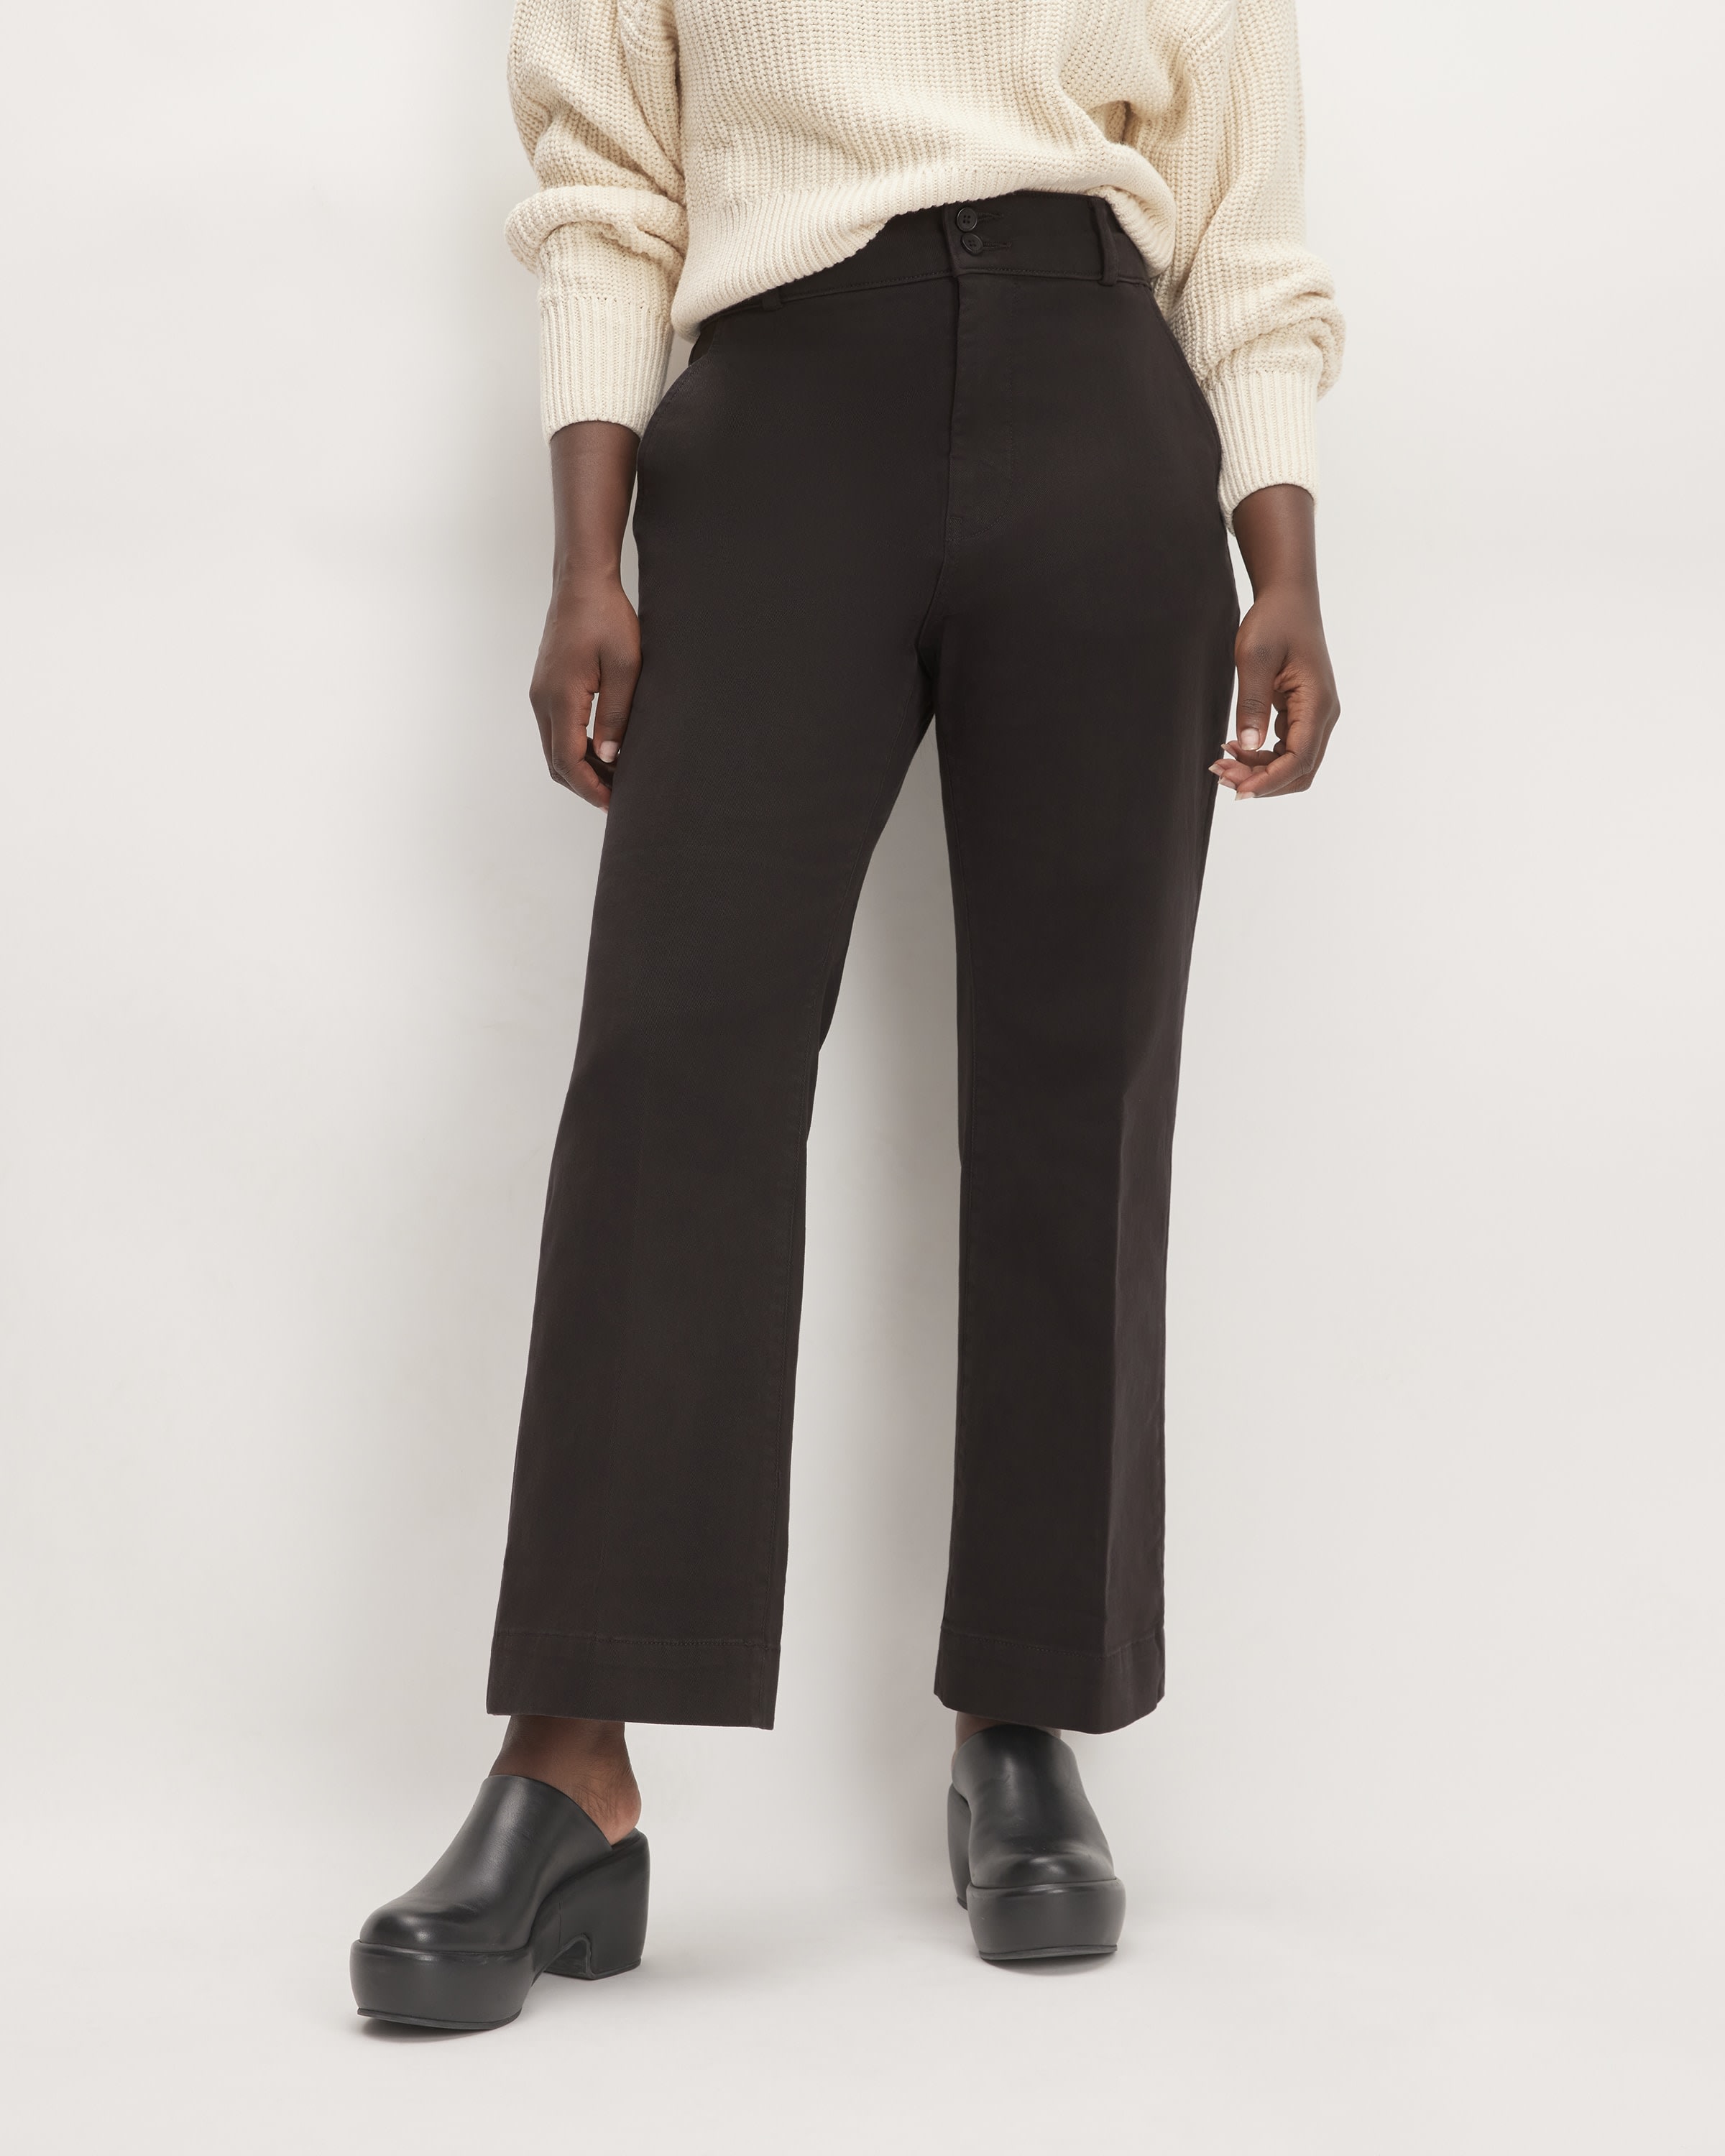  Other Stories cotton flare pants in black - BROWN